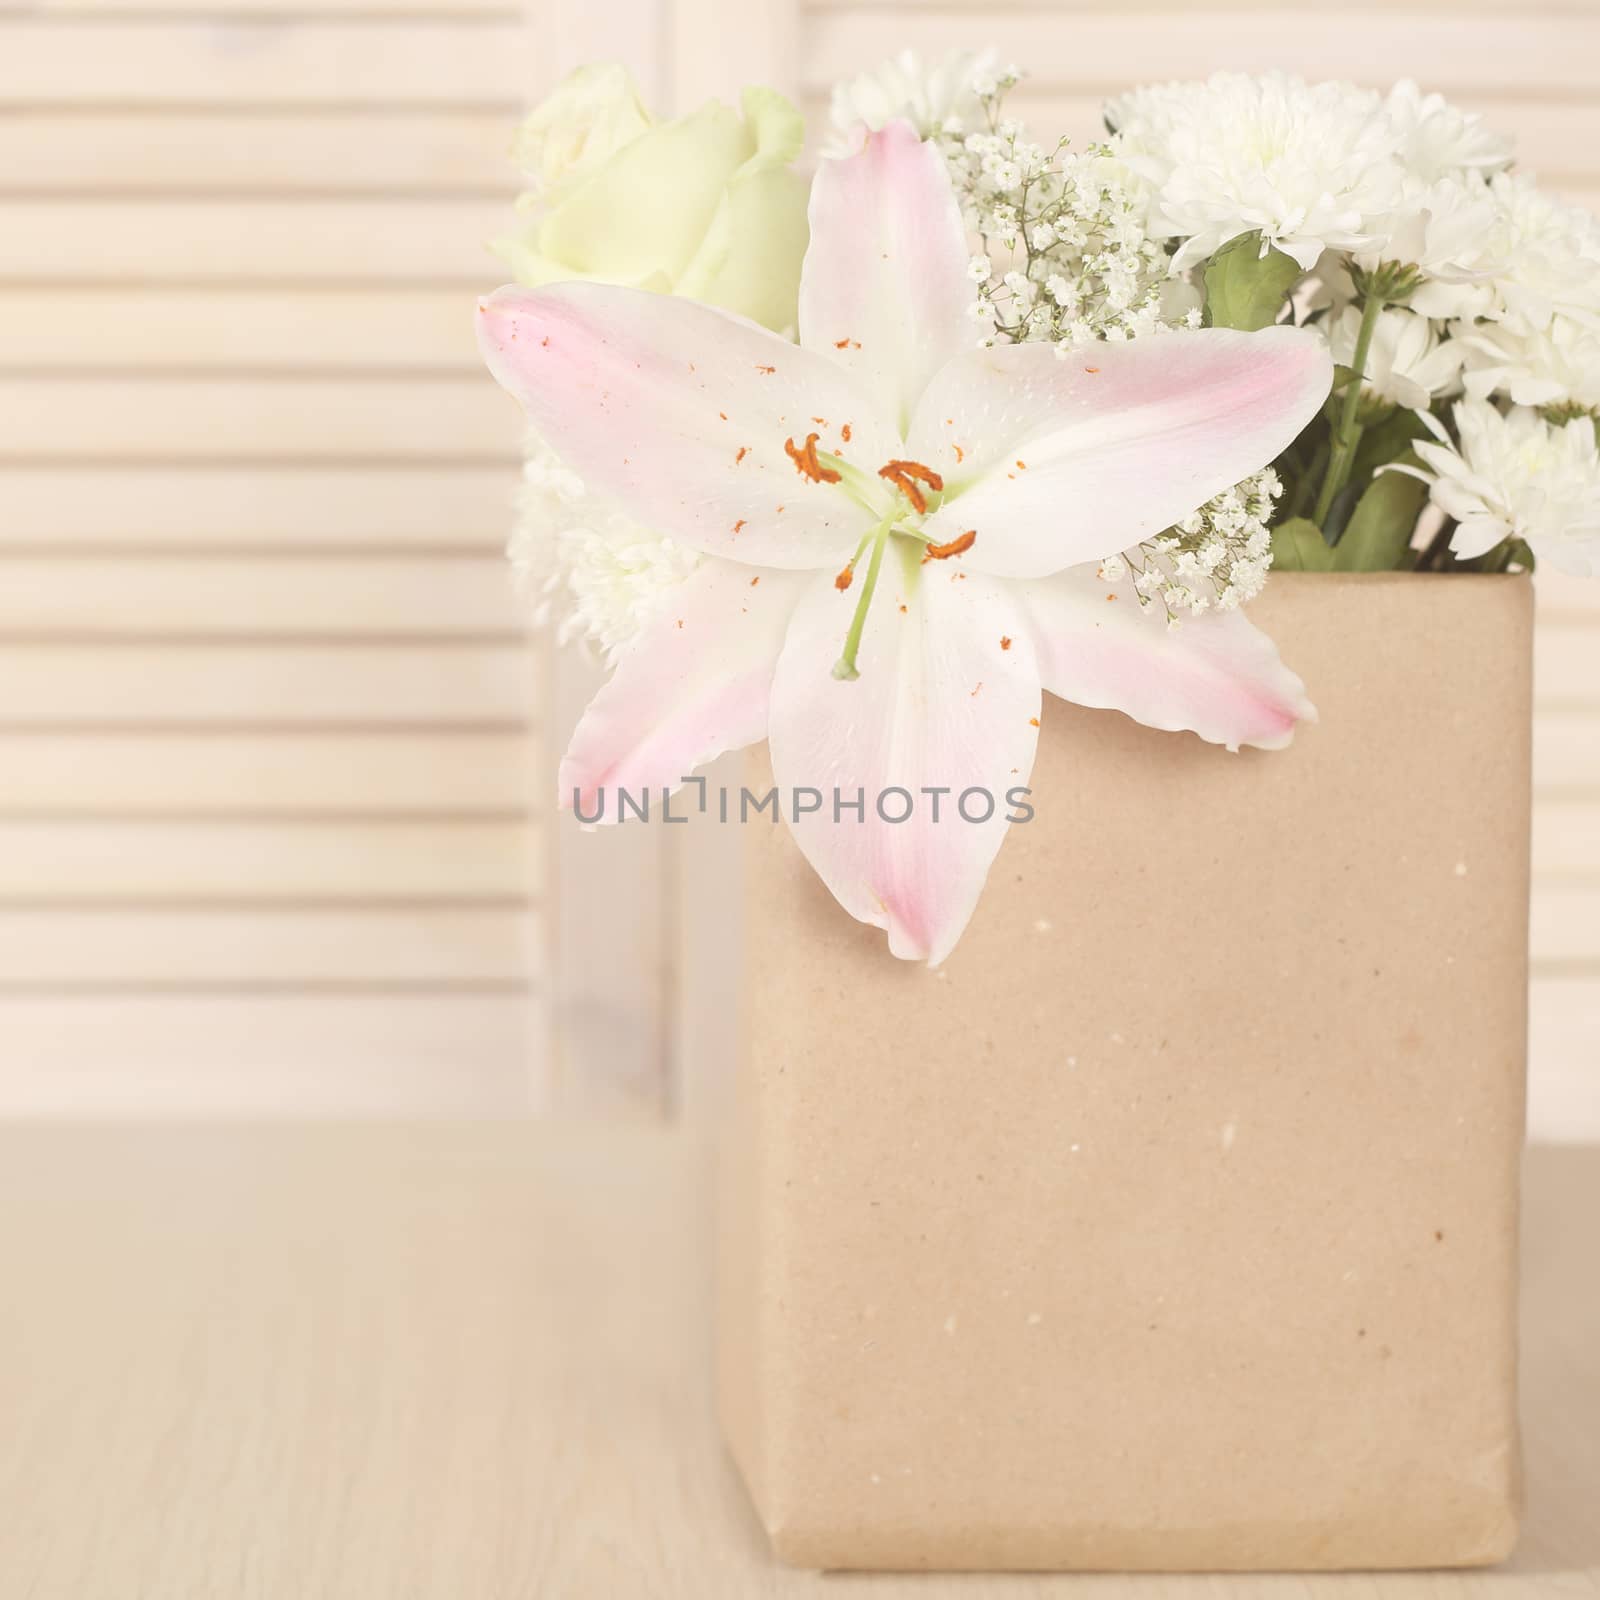 Flowers in brown paper bag on wooden background